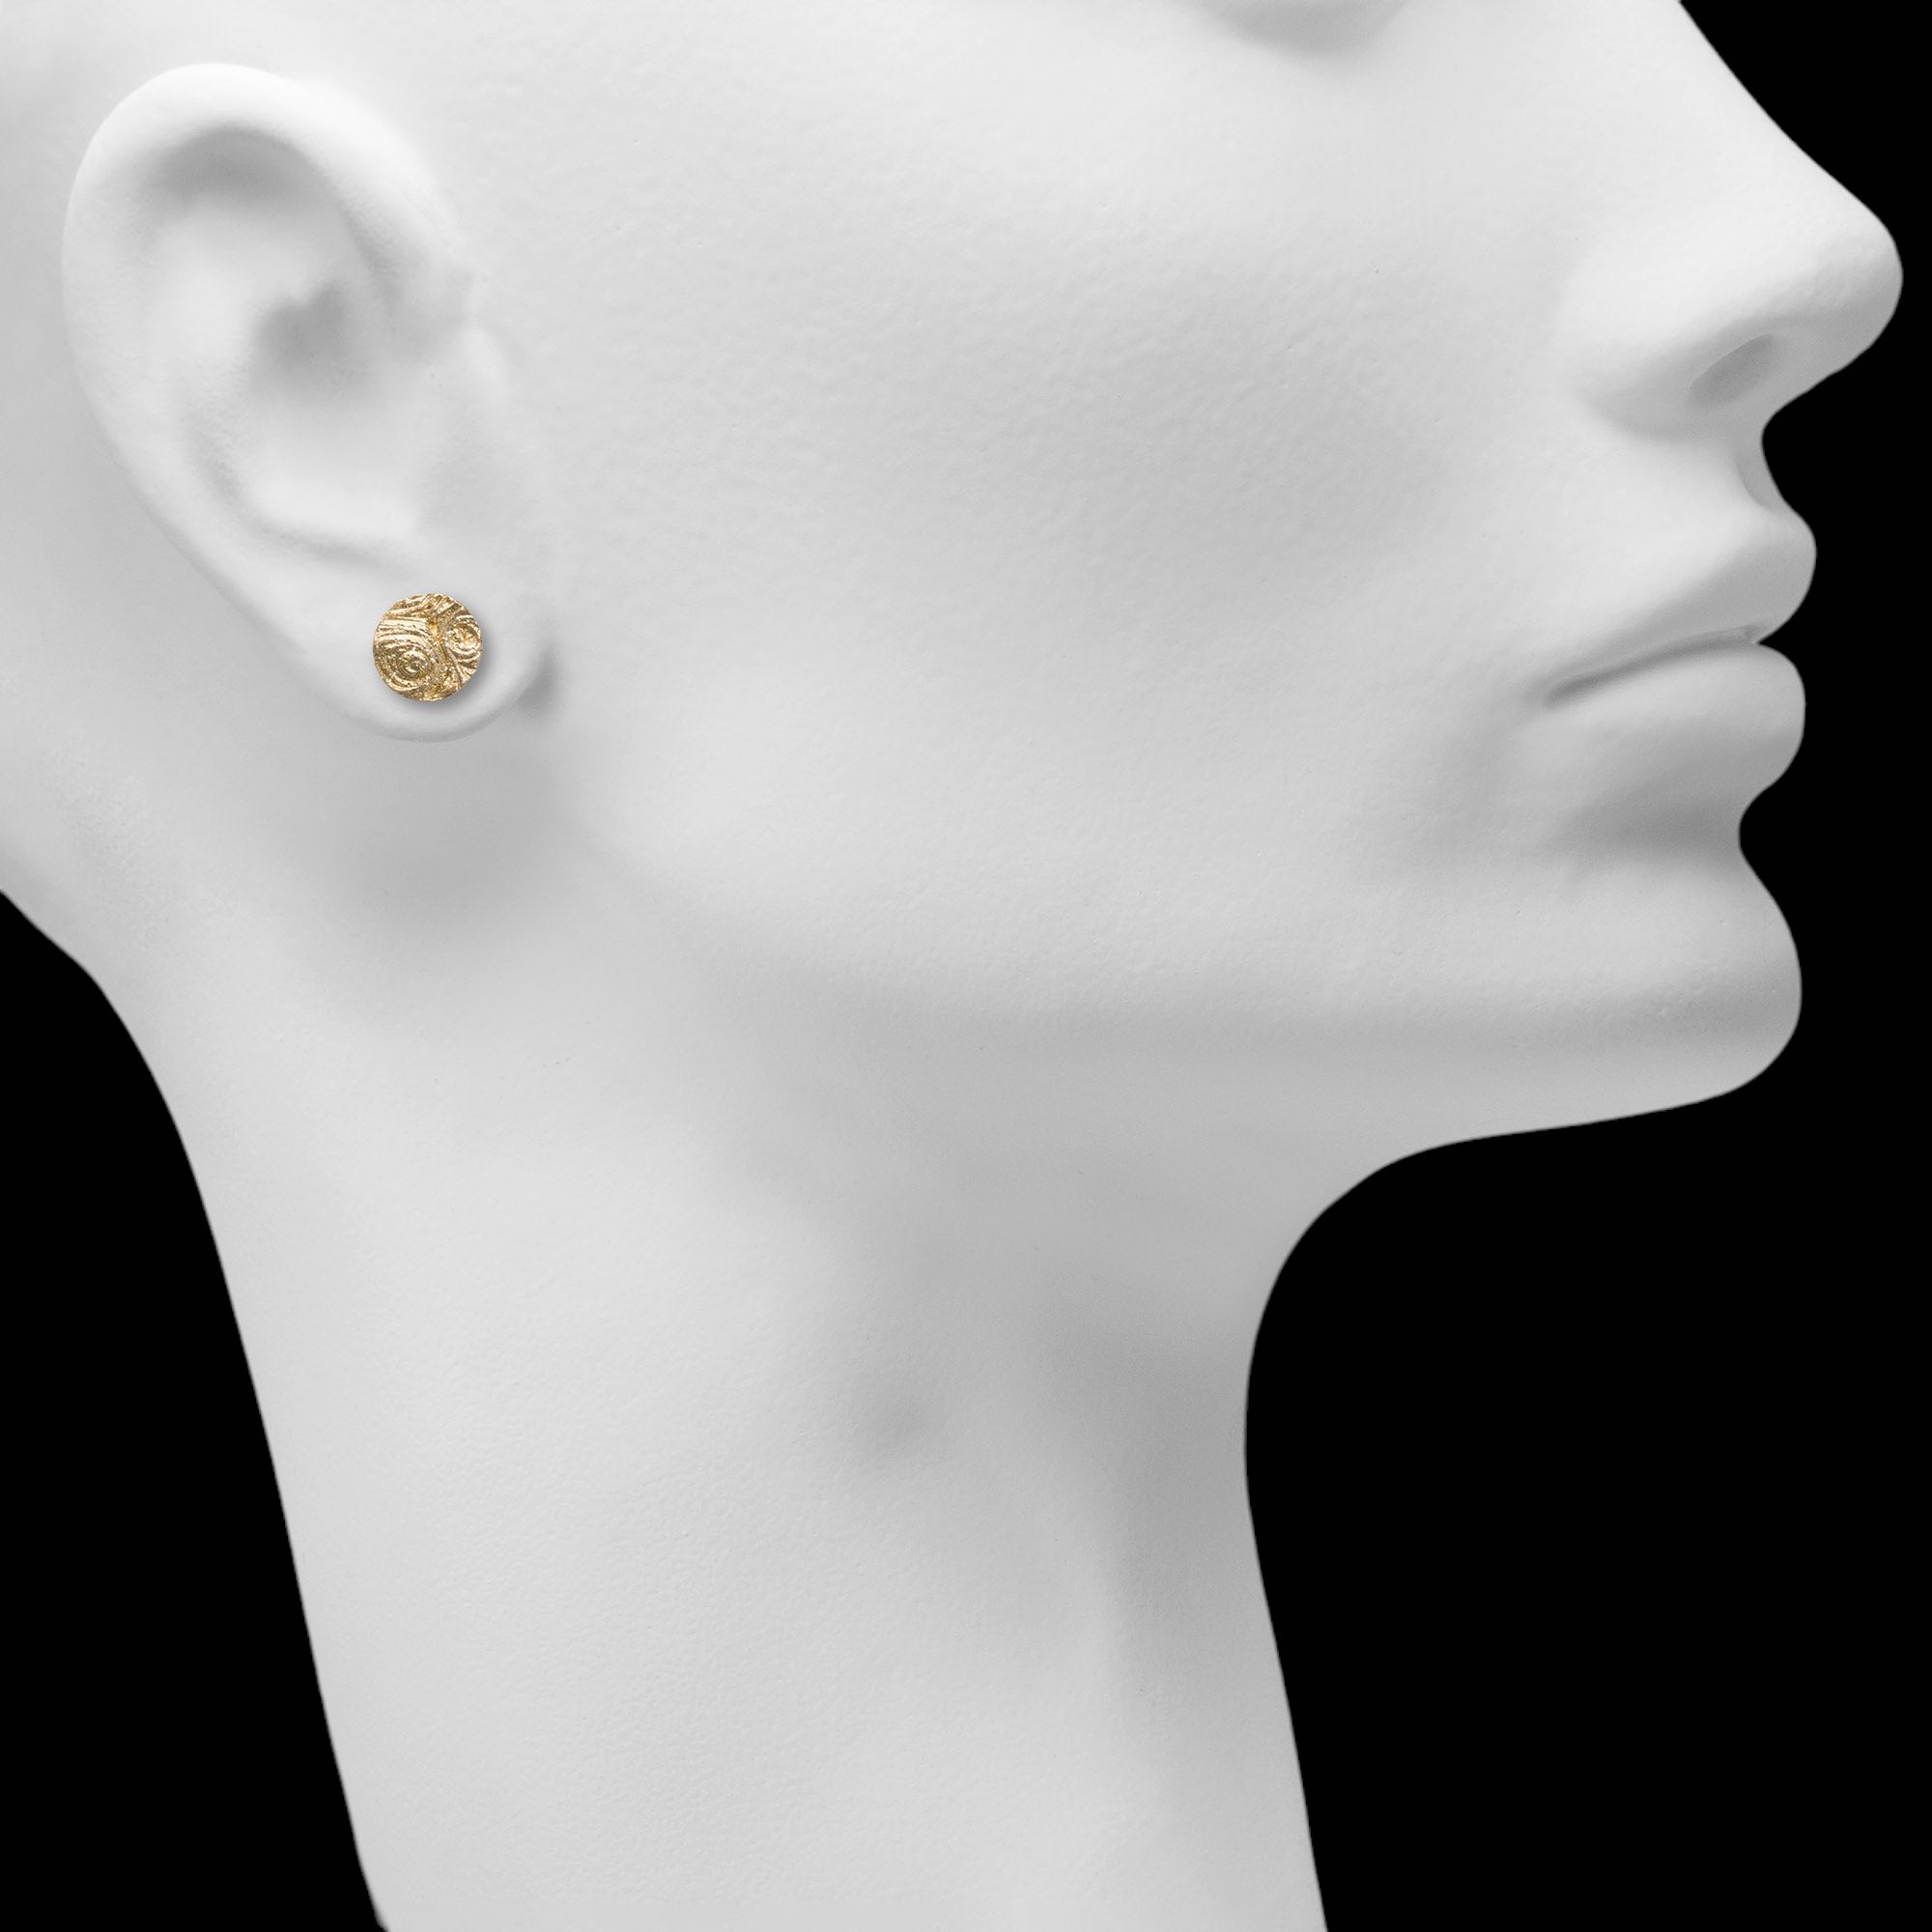 Round mini gold decorated earrings of 18kt